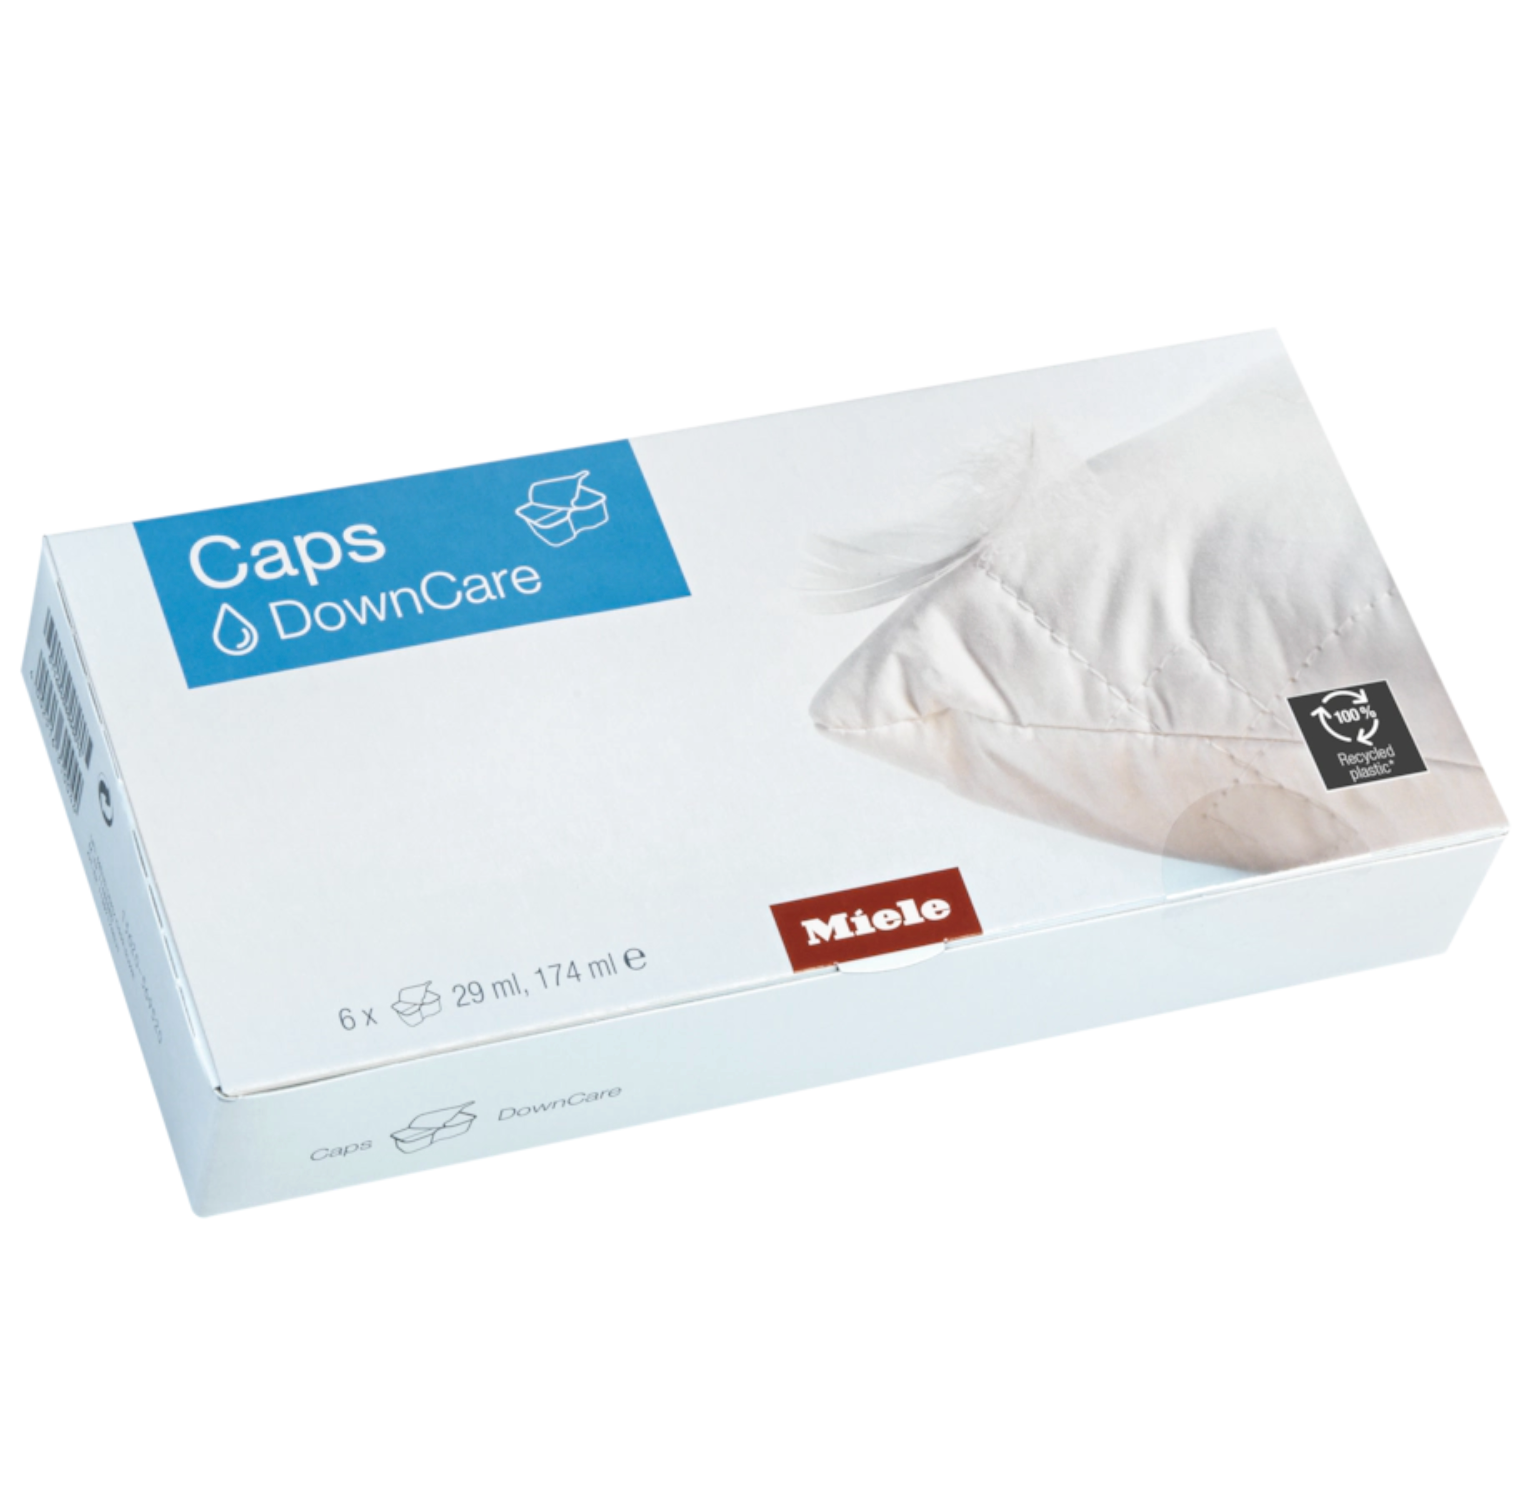 Miele Down Care Capsules Detergent – Pack of 6